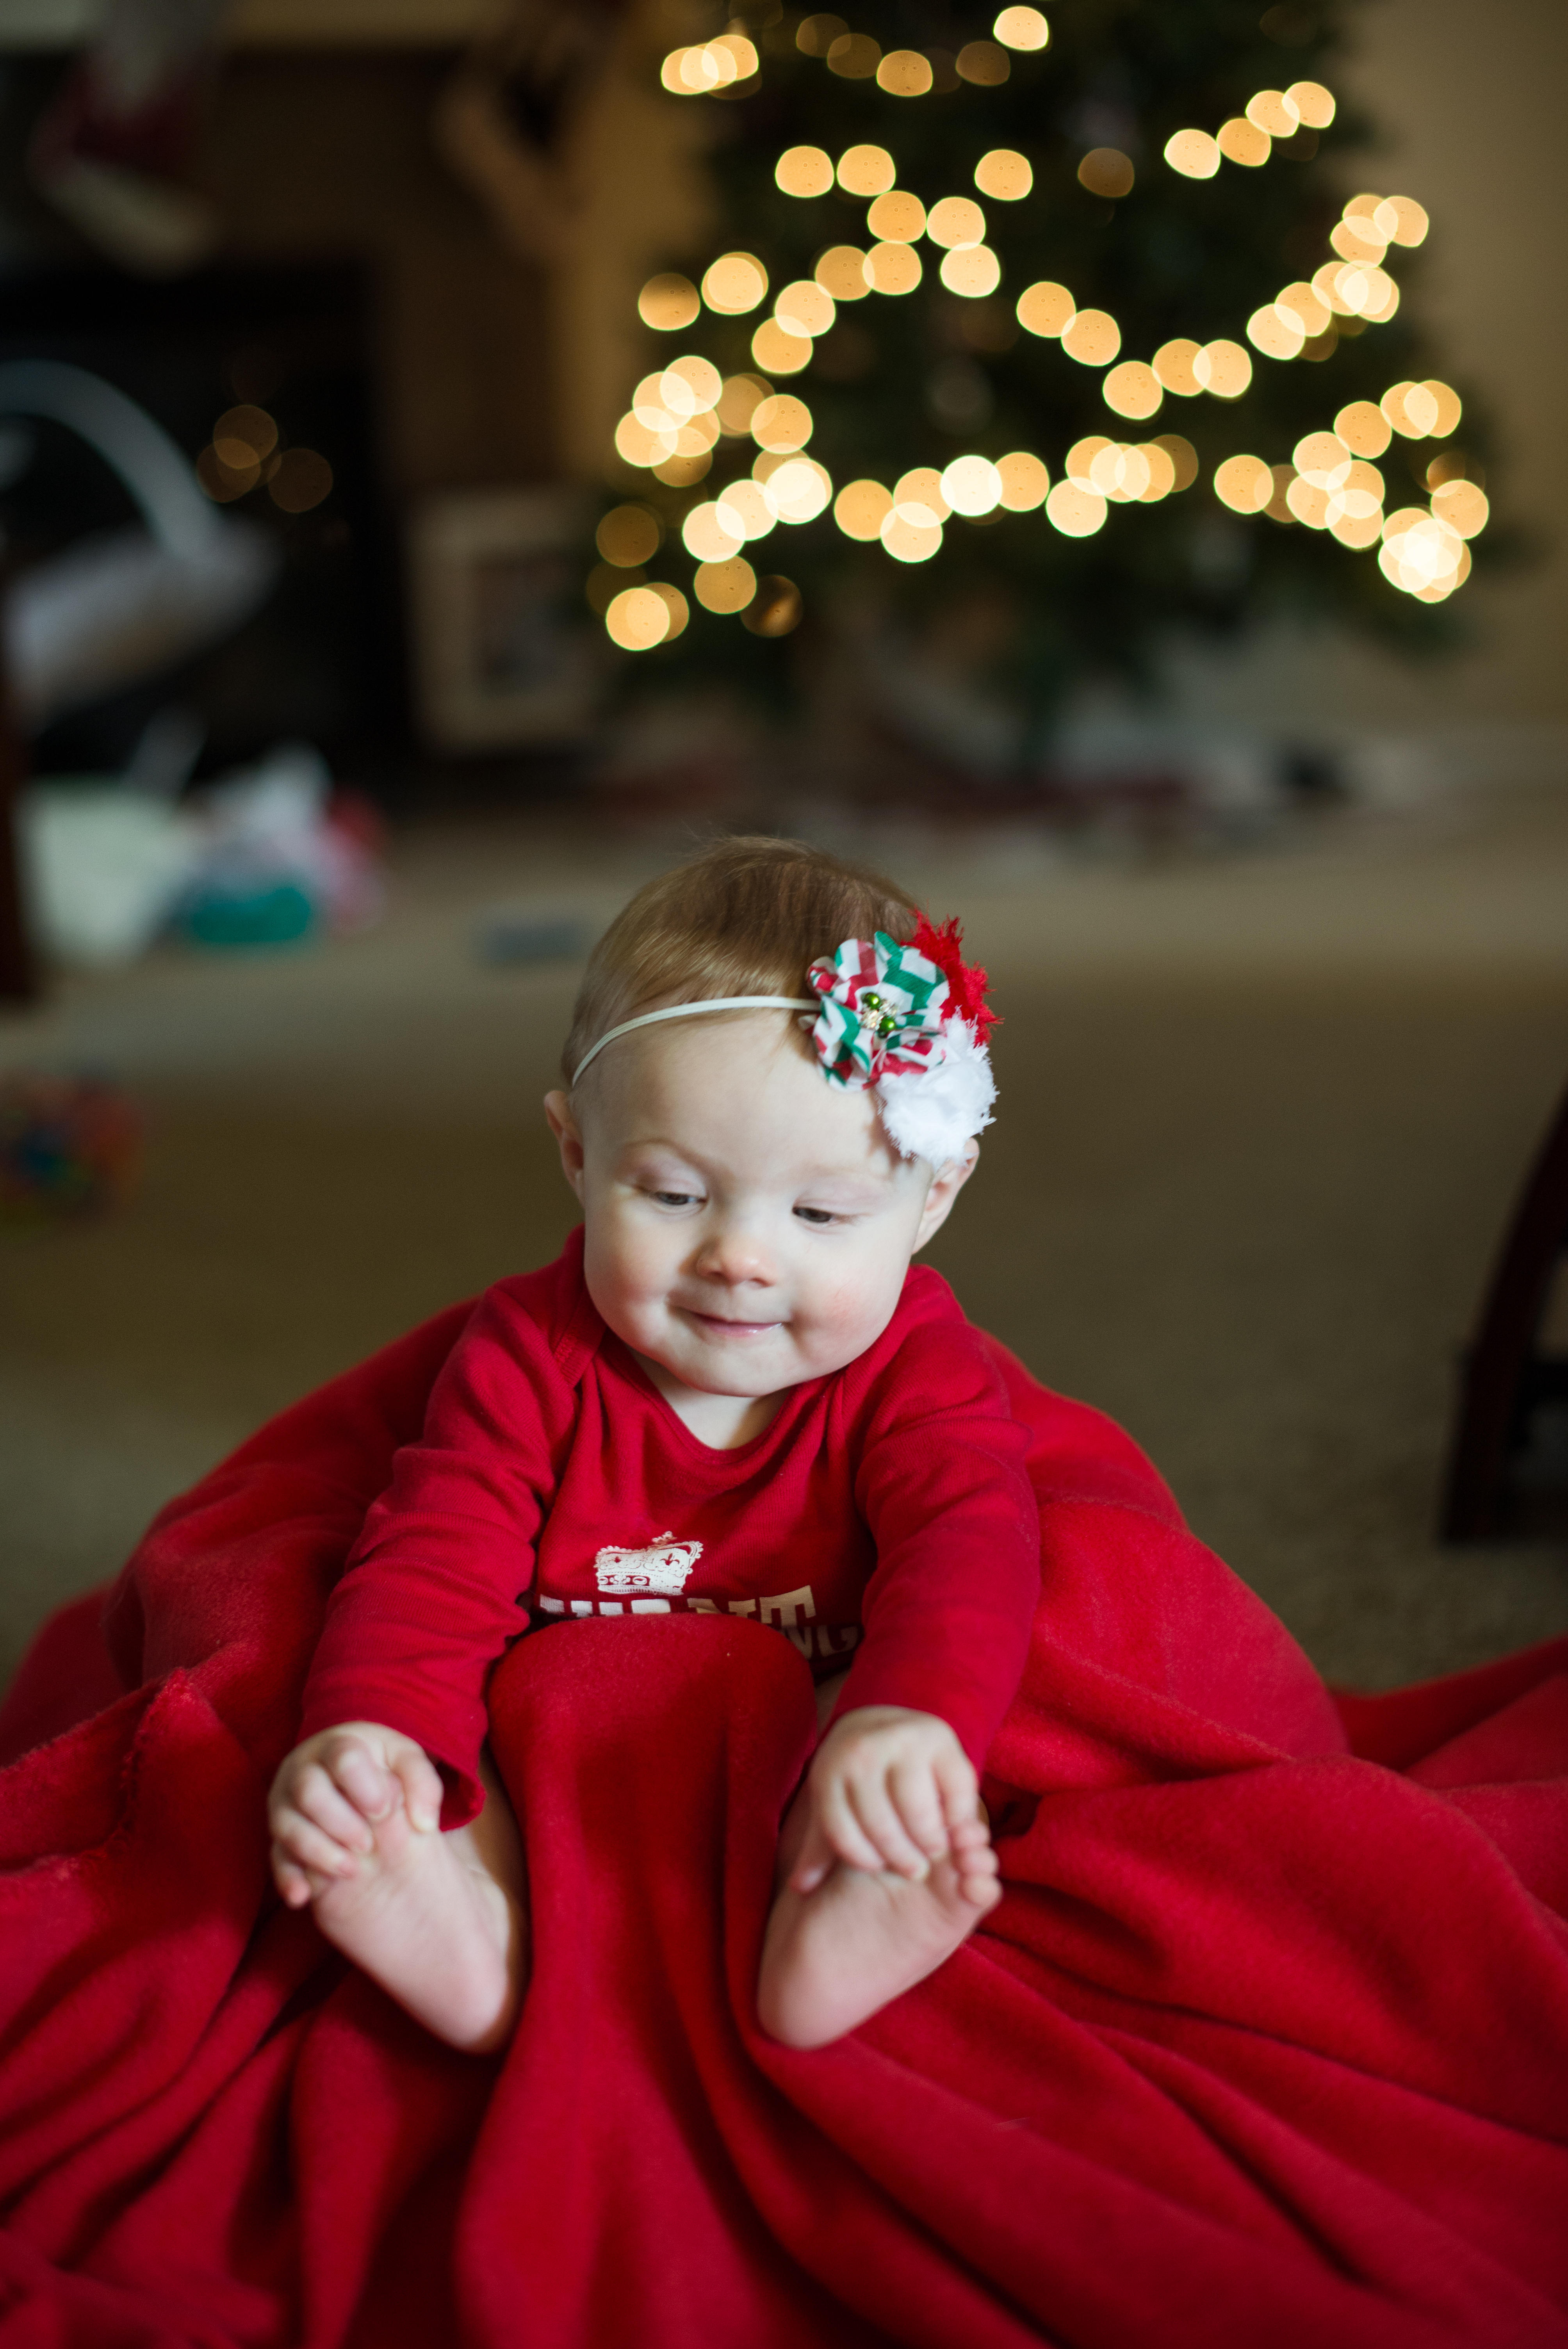 happy birthday raylee 6 month old baby in front of Christmas treevhappy birthday raylee 6 month old baby in front of Christmas tree